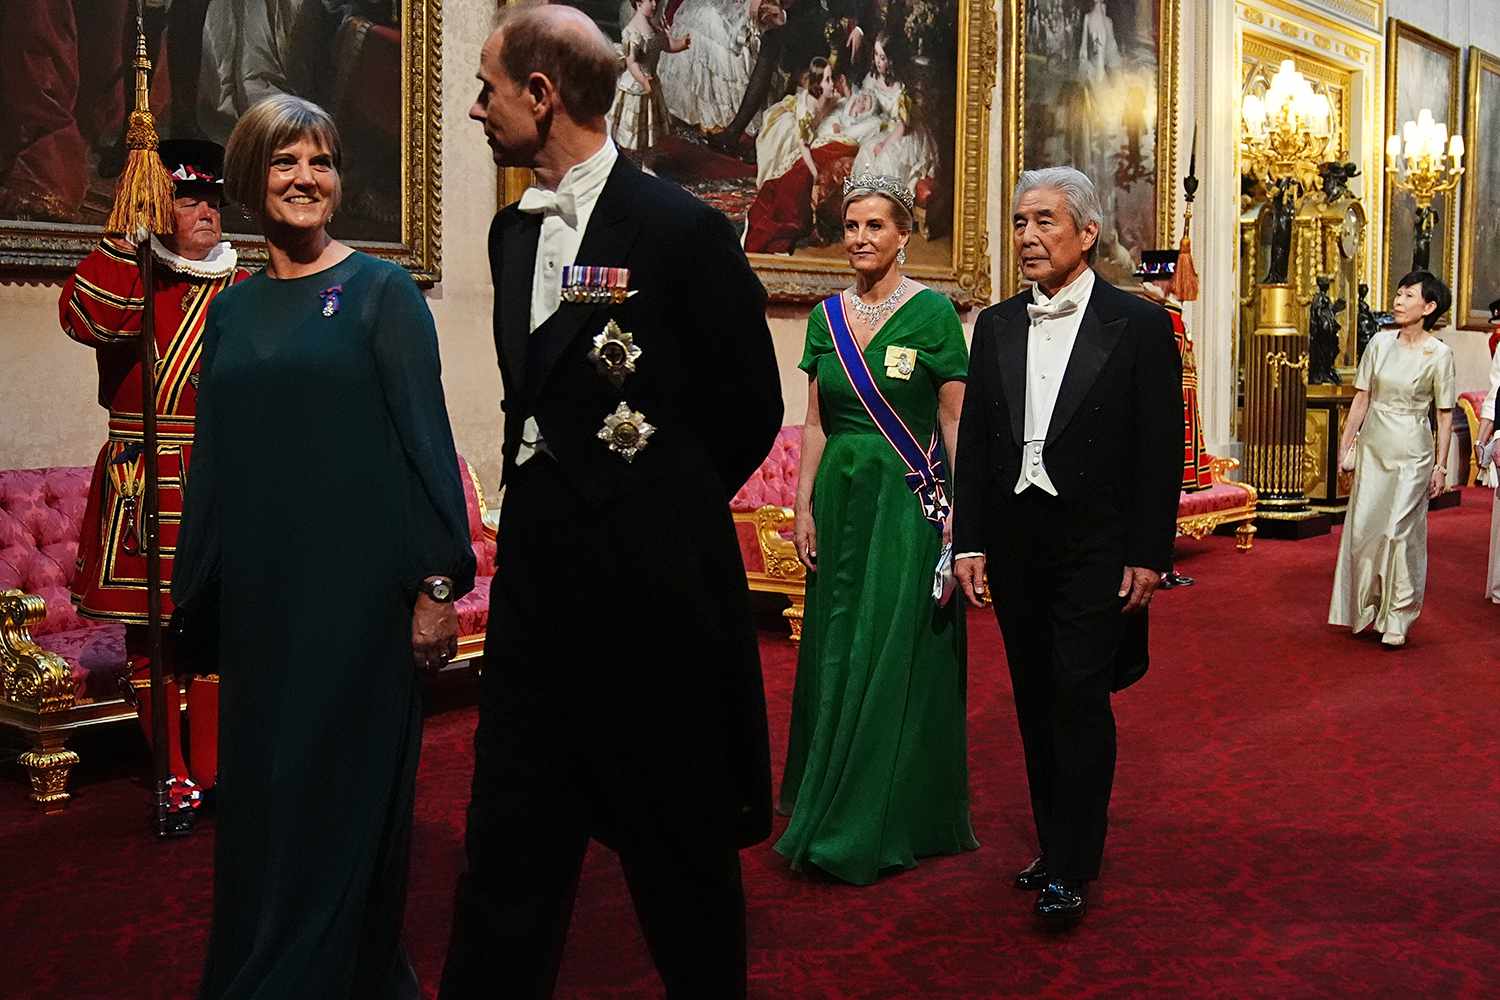 Sophie, the Duchess of Edinburgh Wears One of Kate Middleton's Favorite Tiaras to State Banquet